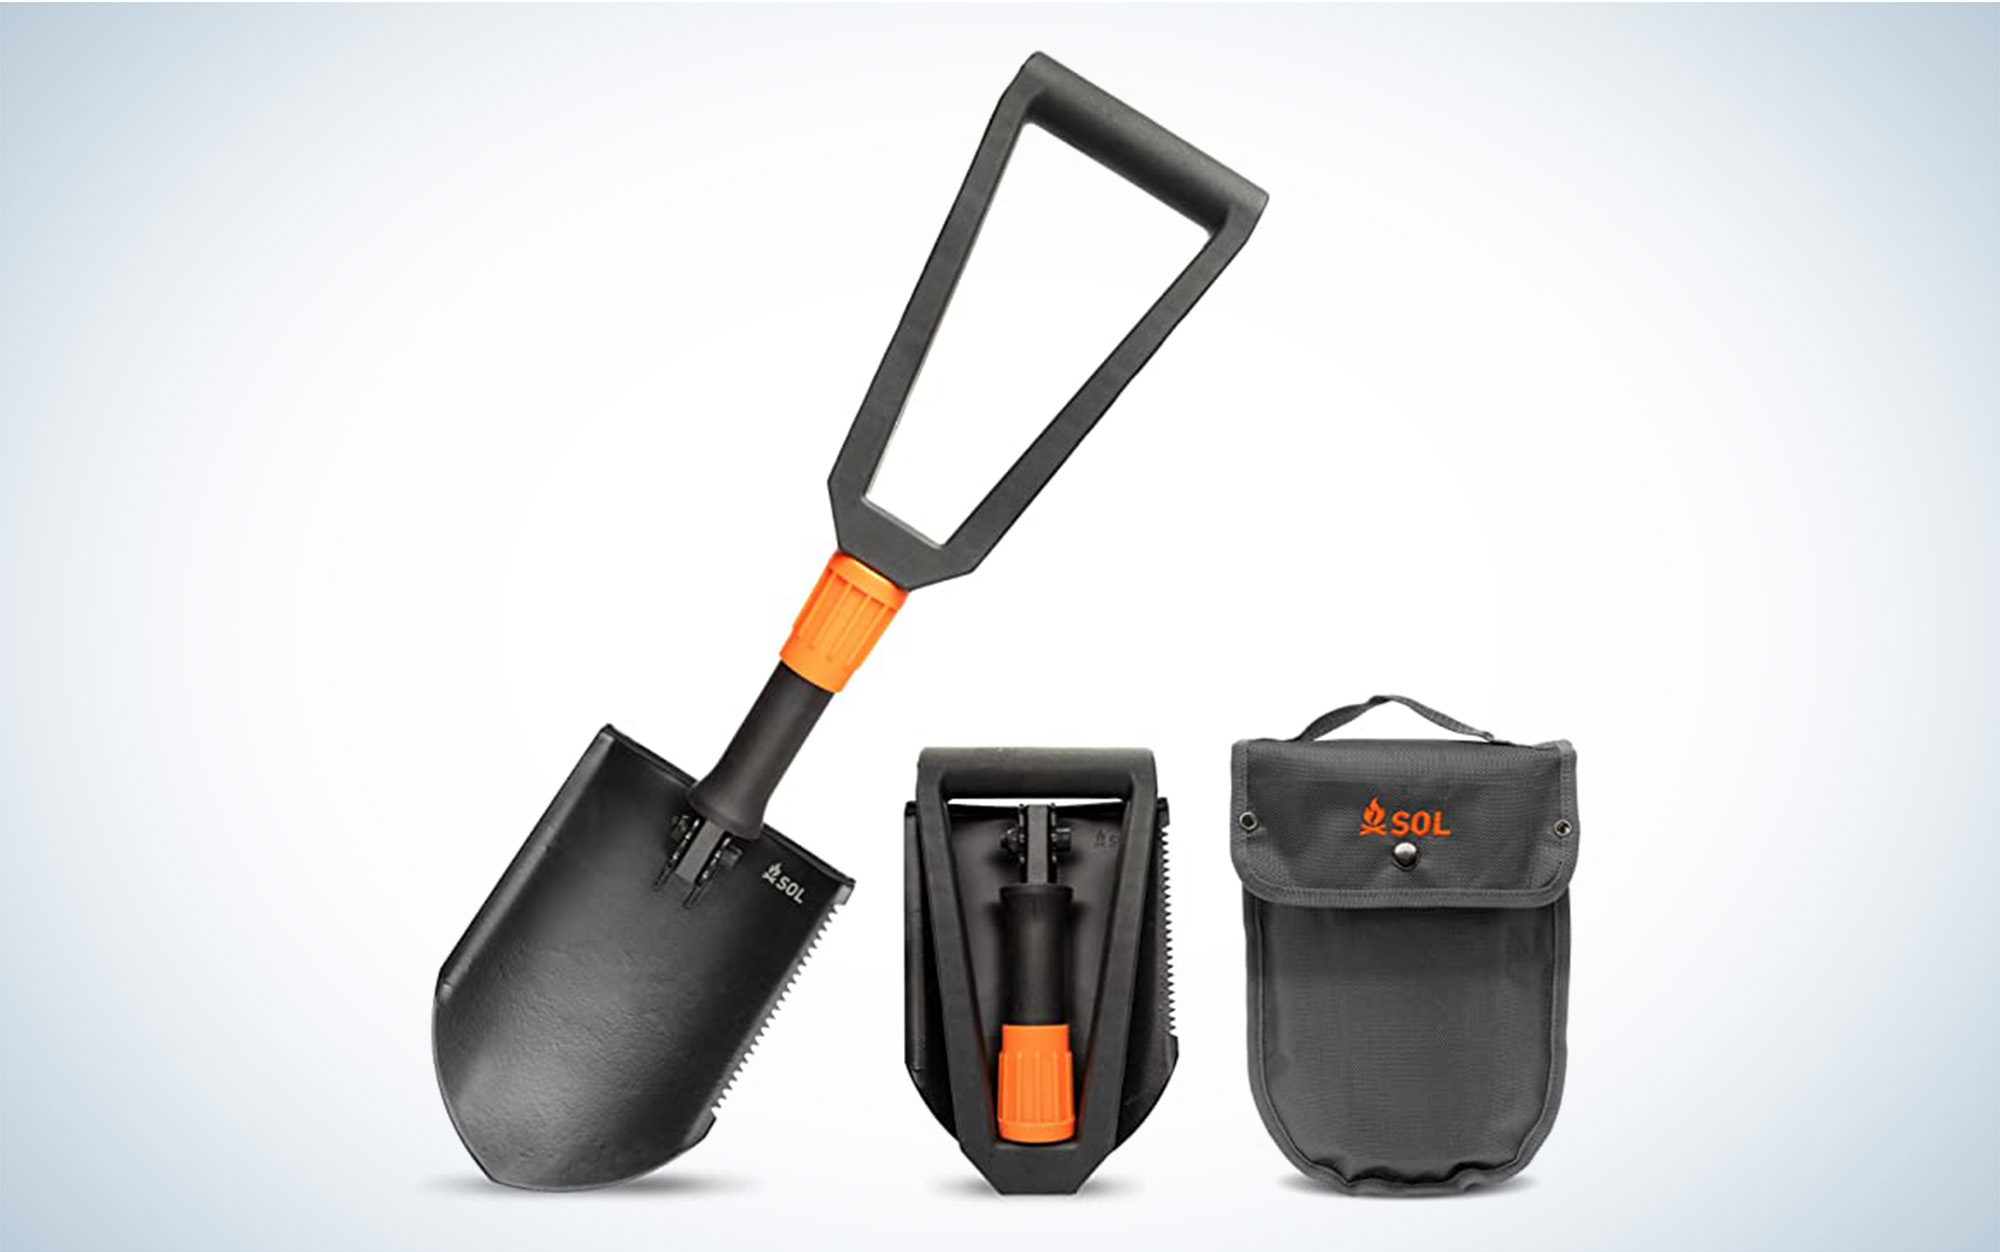 SOL field shovel is a durable and packable steel shovel